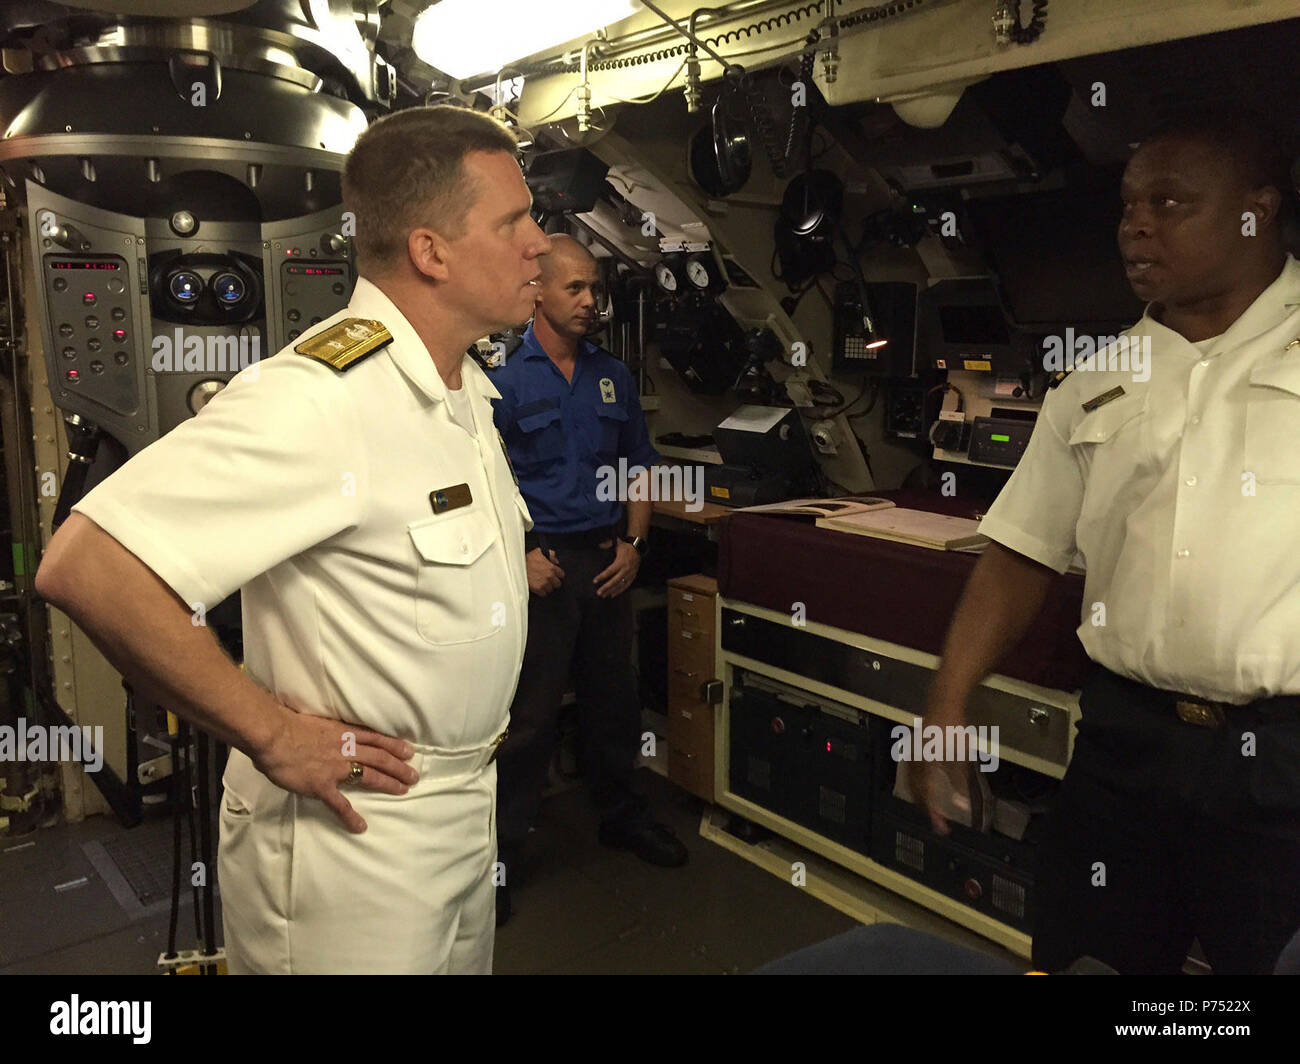 SIMONS TOWN, South Africa (May 8, 2015) U.S. 6th Fleet Vice Commander Rear Adm. Tom Reck, left, speaks with Cmdr. Thamsanqa Matsane aboard the South African navy submarine SAS Queen Modjadji (S103) during a key leader engagement visit, May 8, 2015. Stock Photo